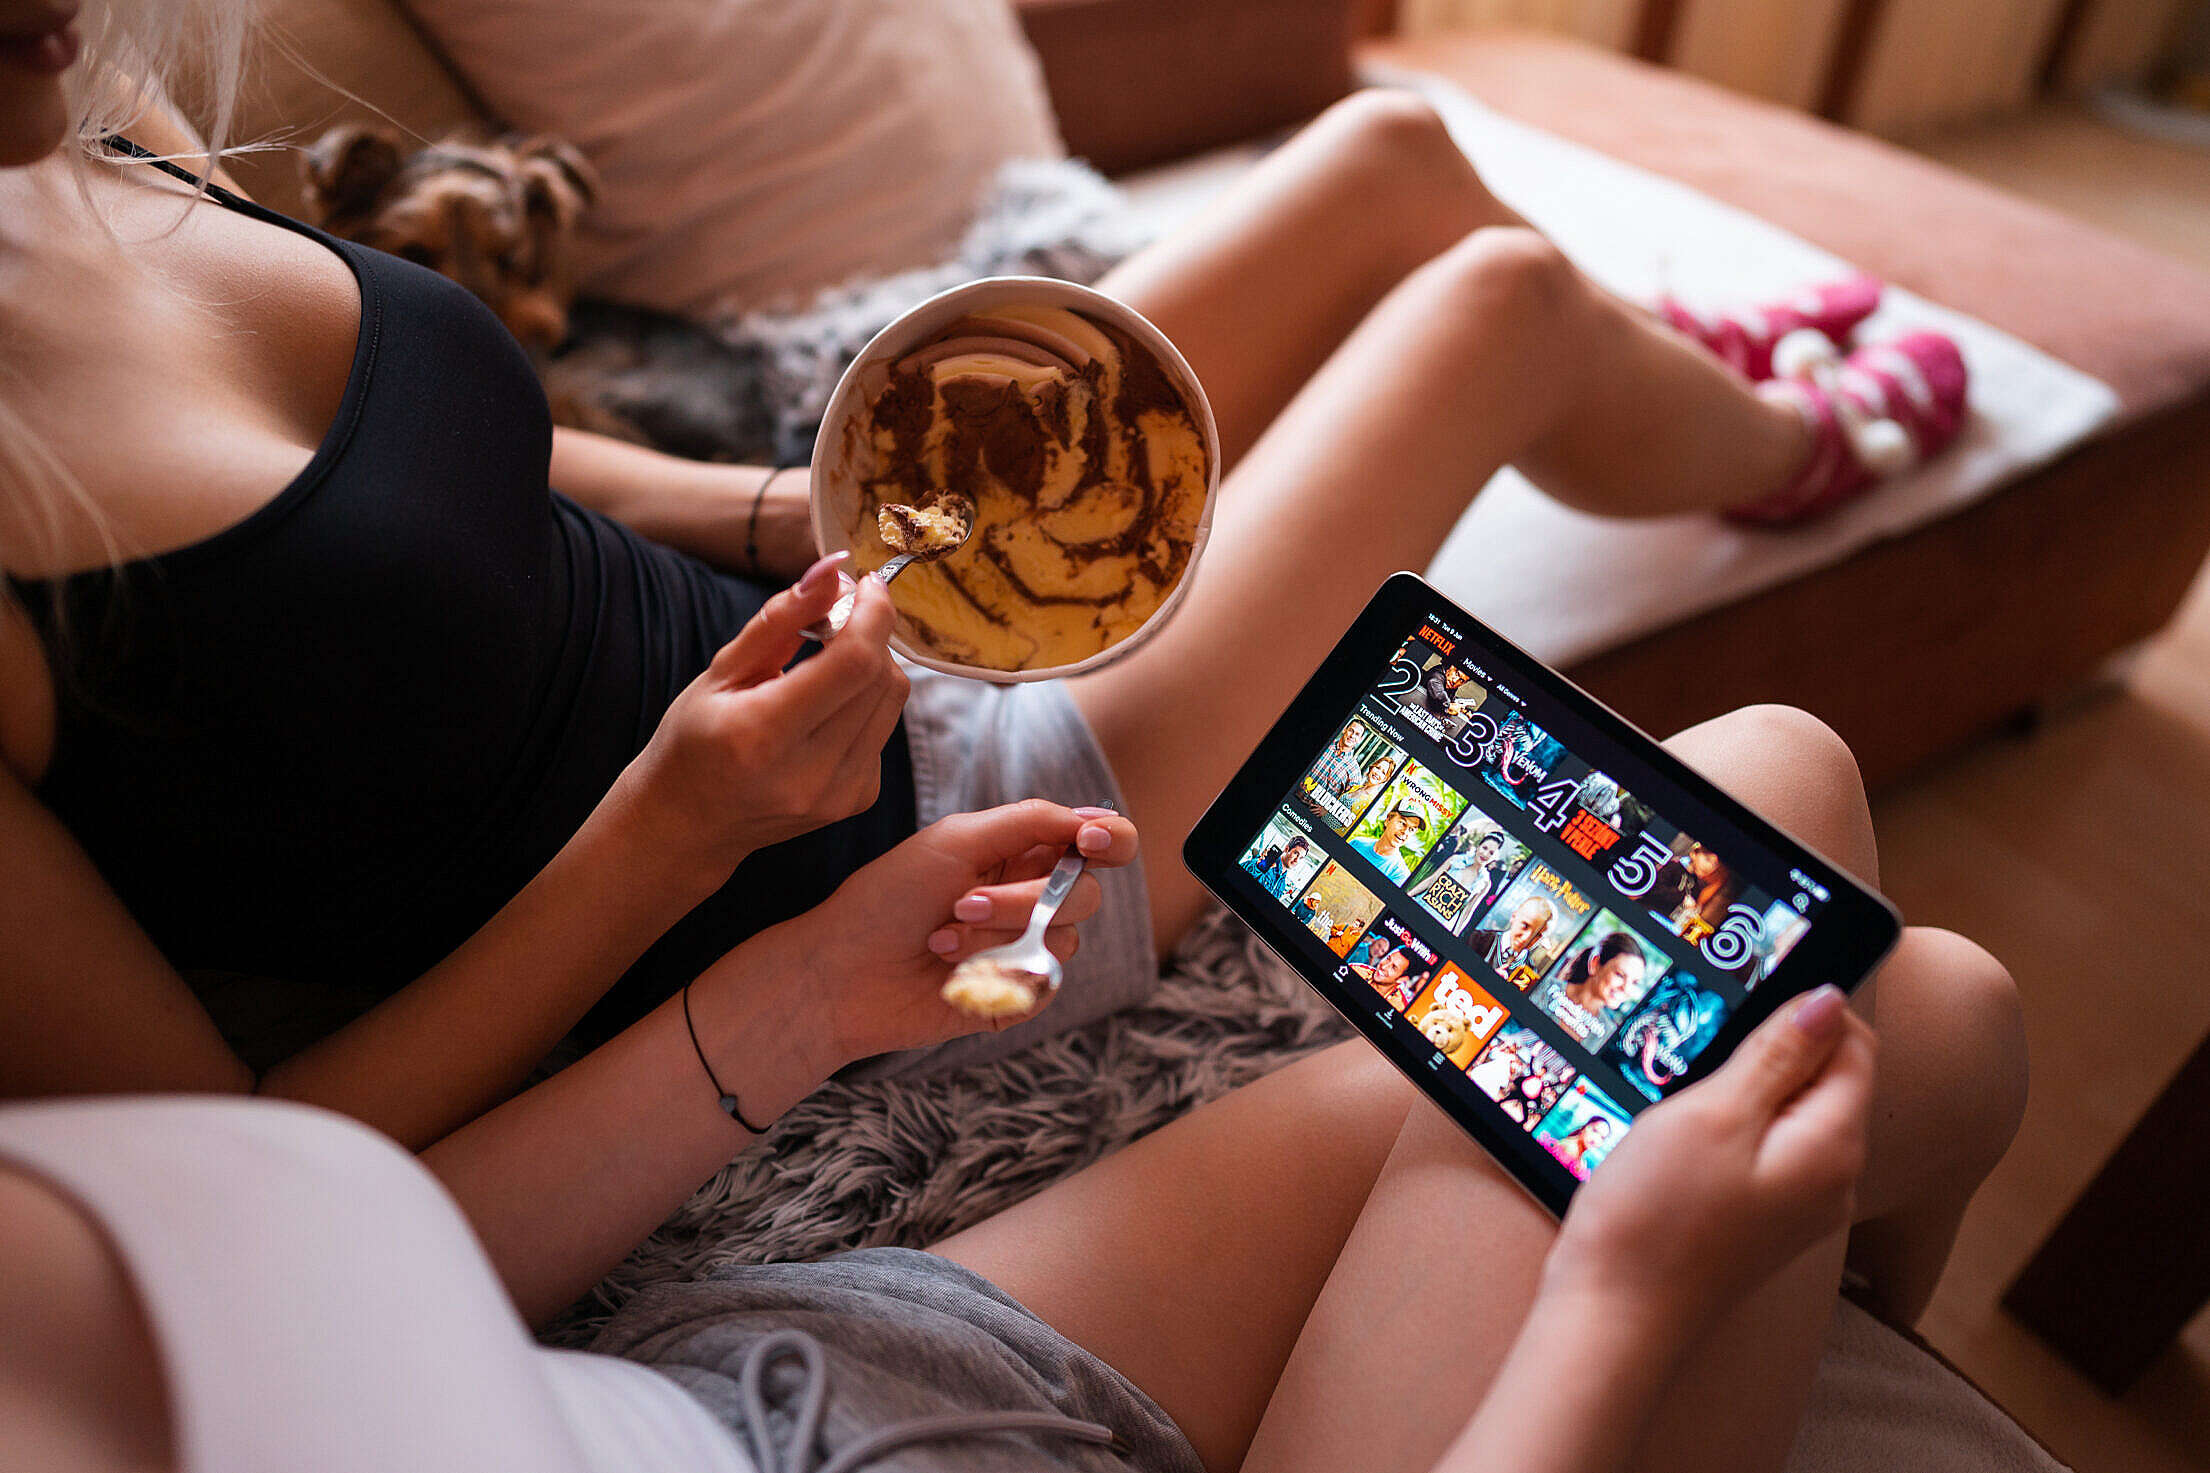 Girls Eating Ice Cream and Watching Netflix on a Tablet Free Stock Photo